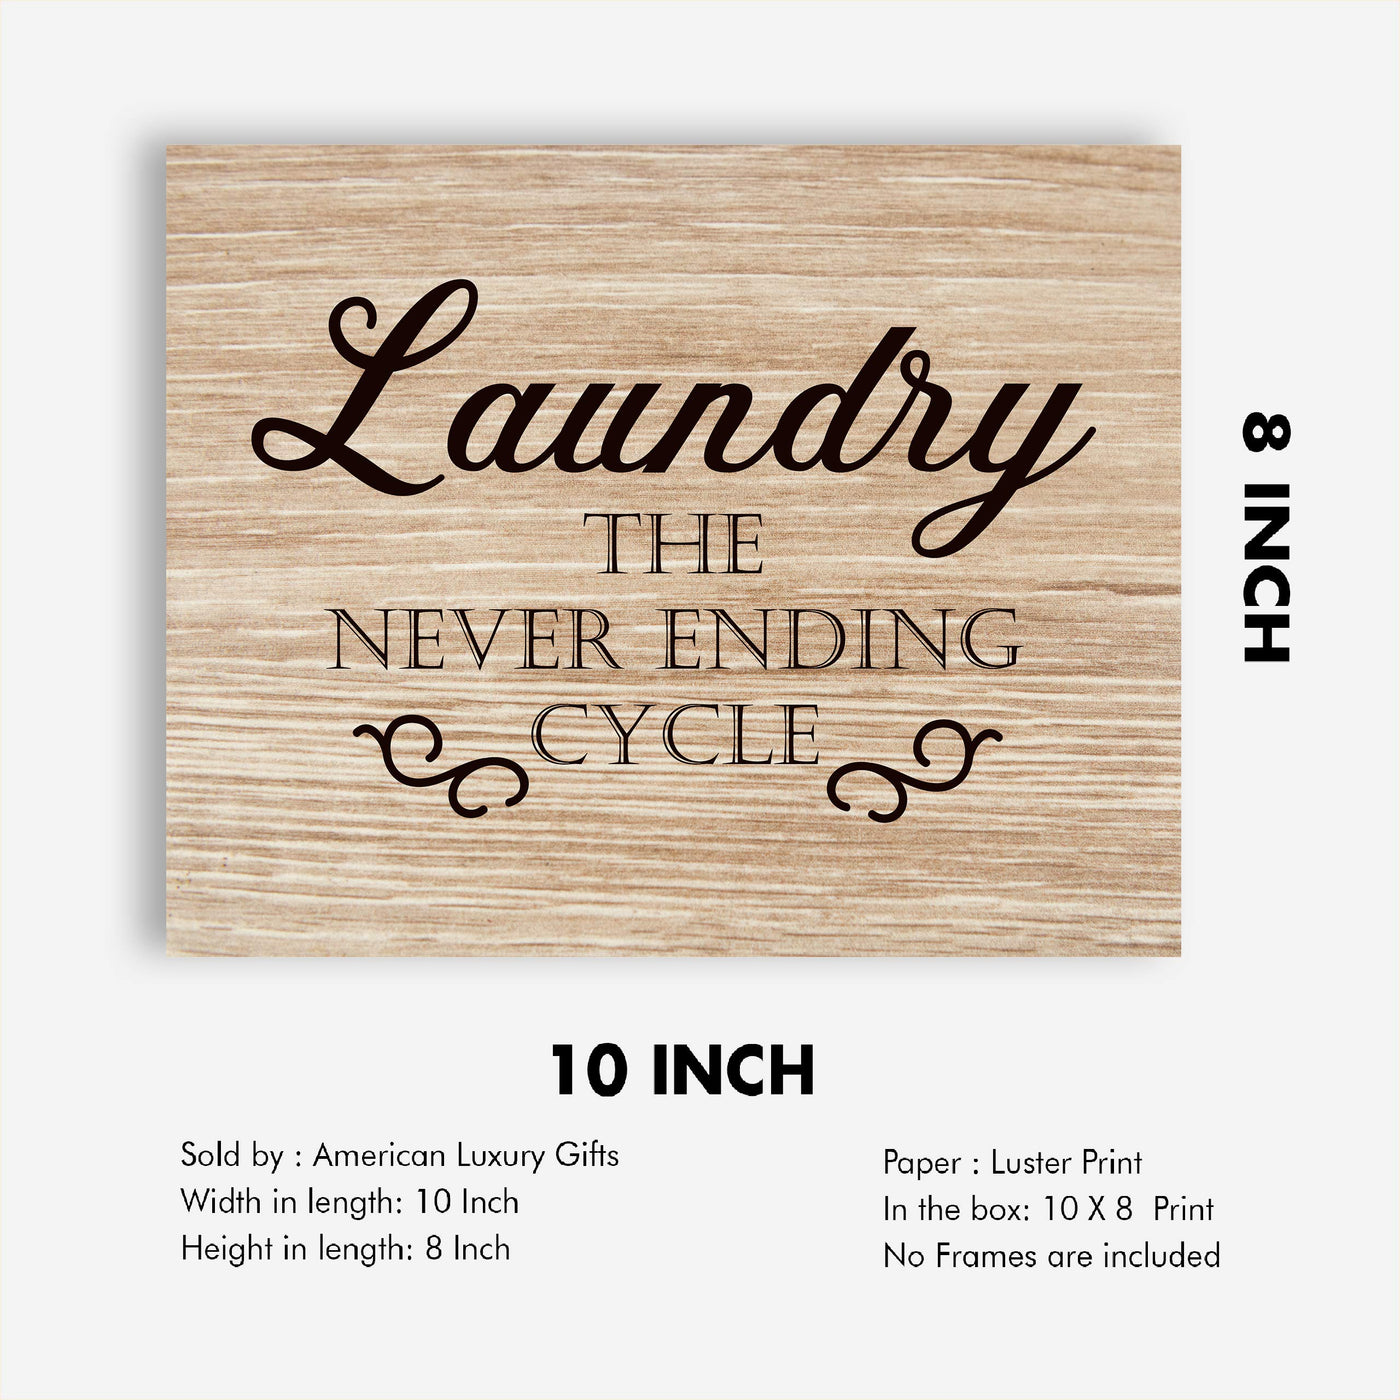 Laundry-The Neverending Cycle-Funny Signs Wall Art-10 x 8" Vintage Replica Wood Print-Ready to Frame. Home-Guest House Decor-Accessories. Funny Decor to Inspire Home Duties! Printed On Photo Paper.